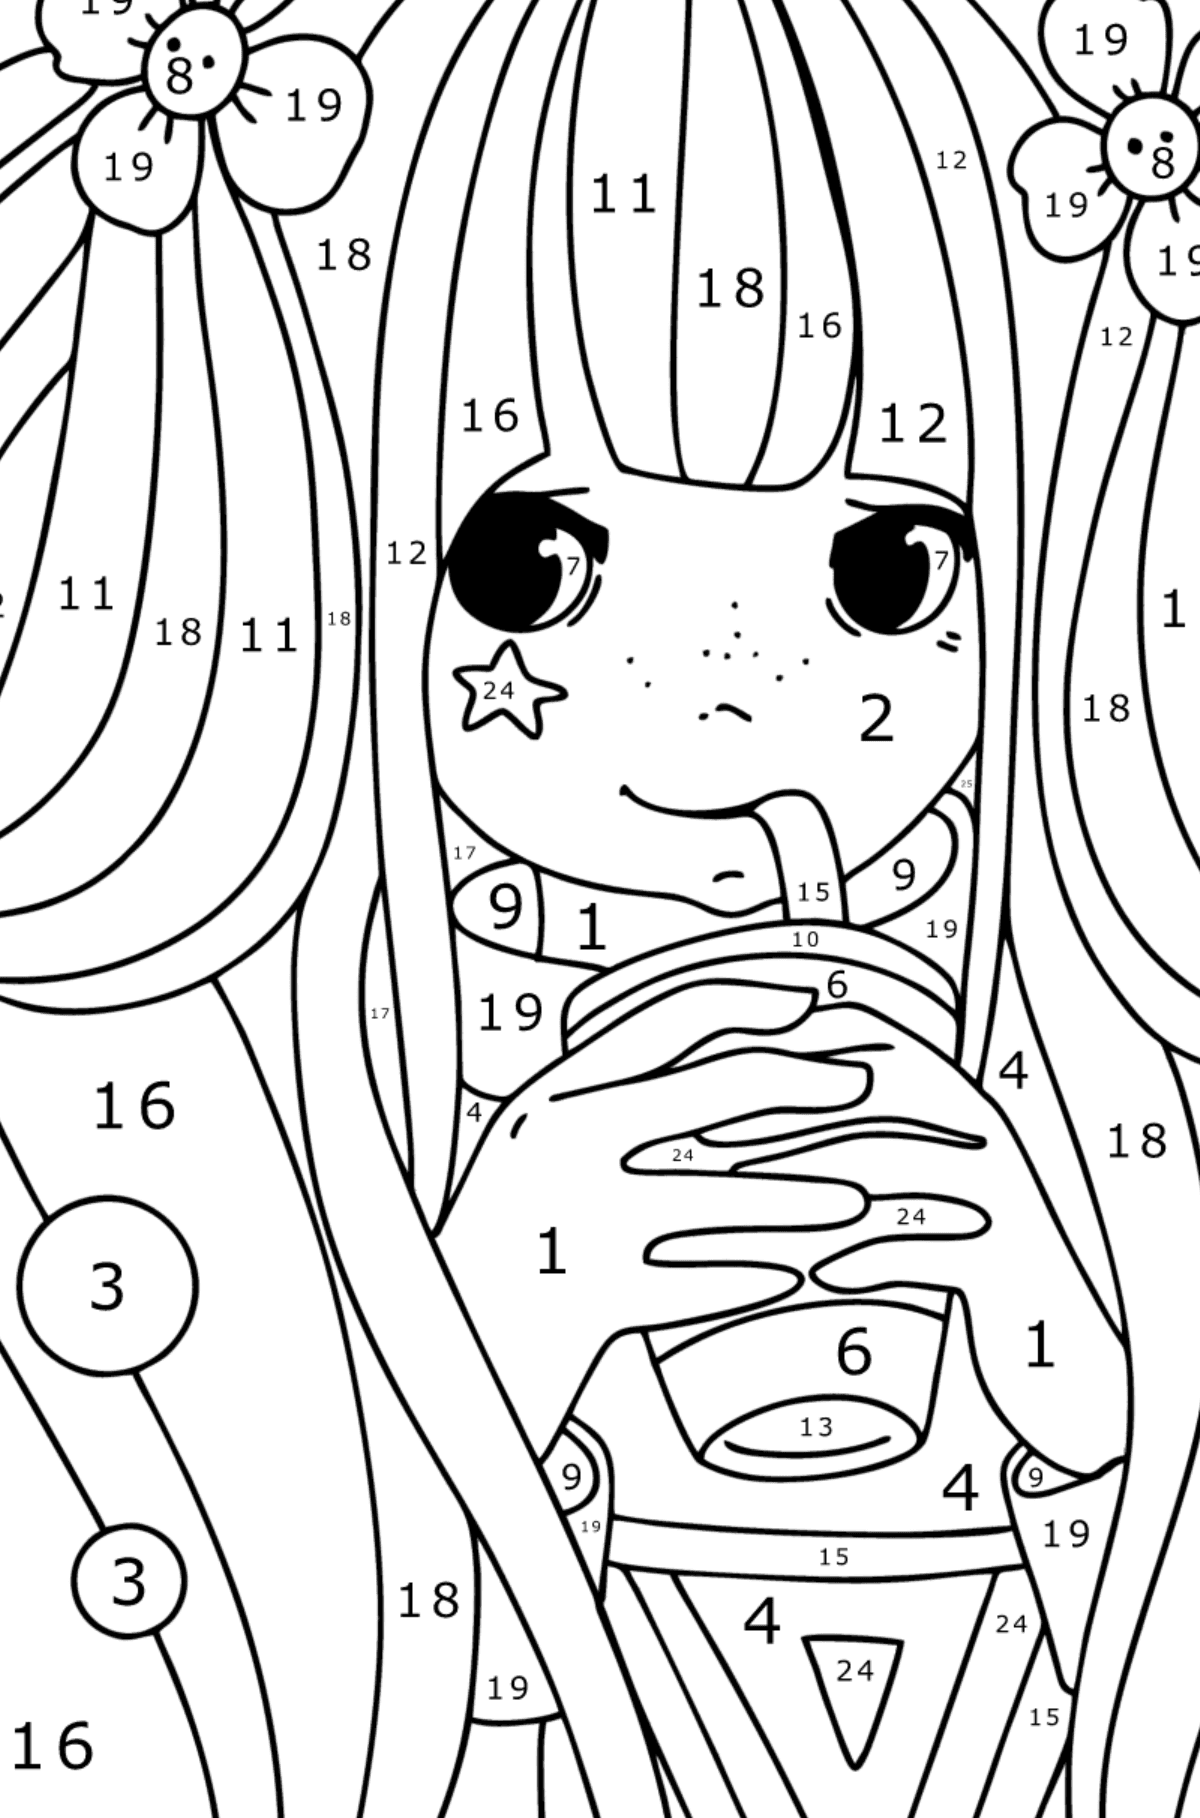 Girl anime fashionista coloring page - Coloring by Numbers for Kids